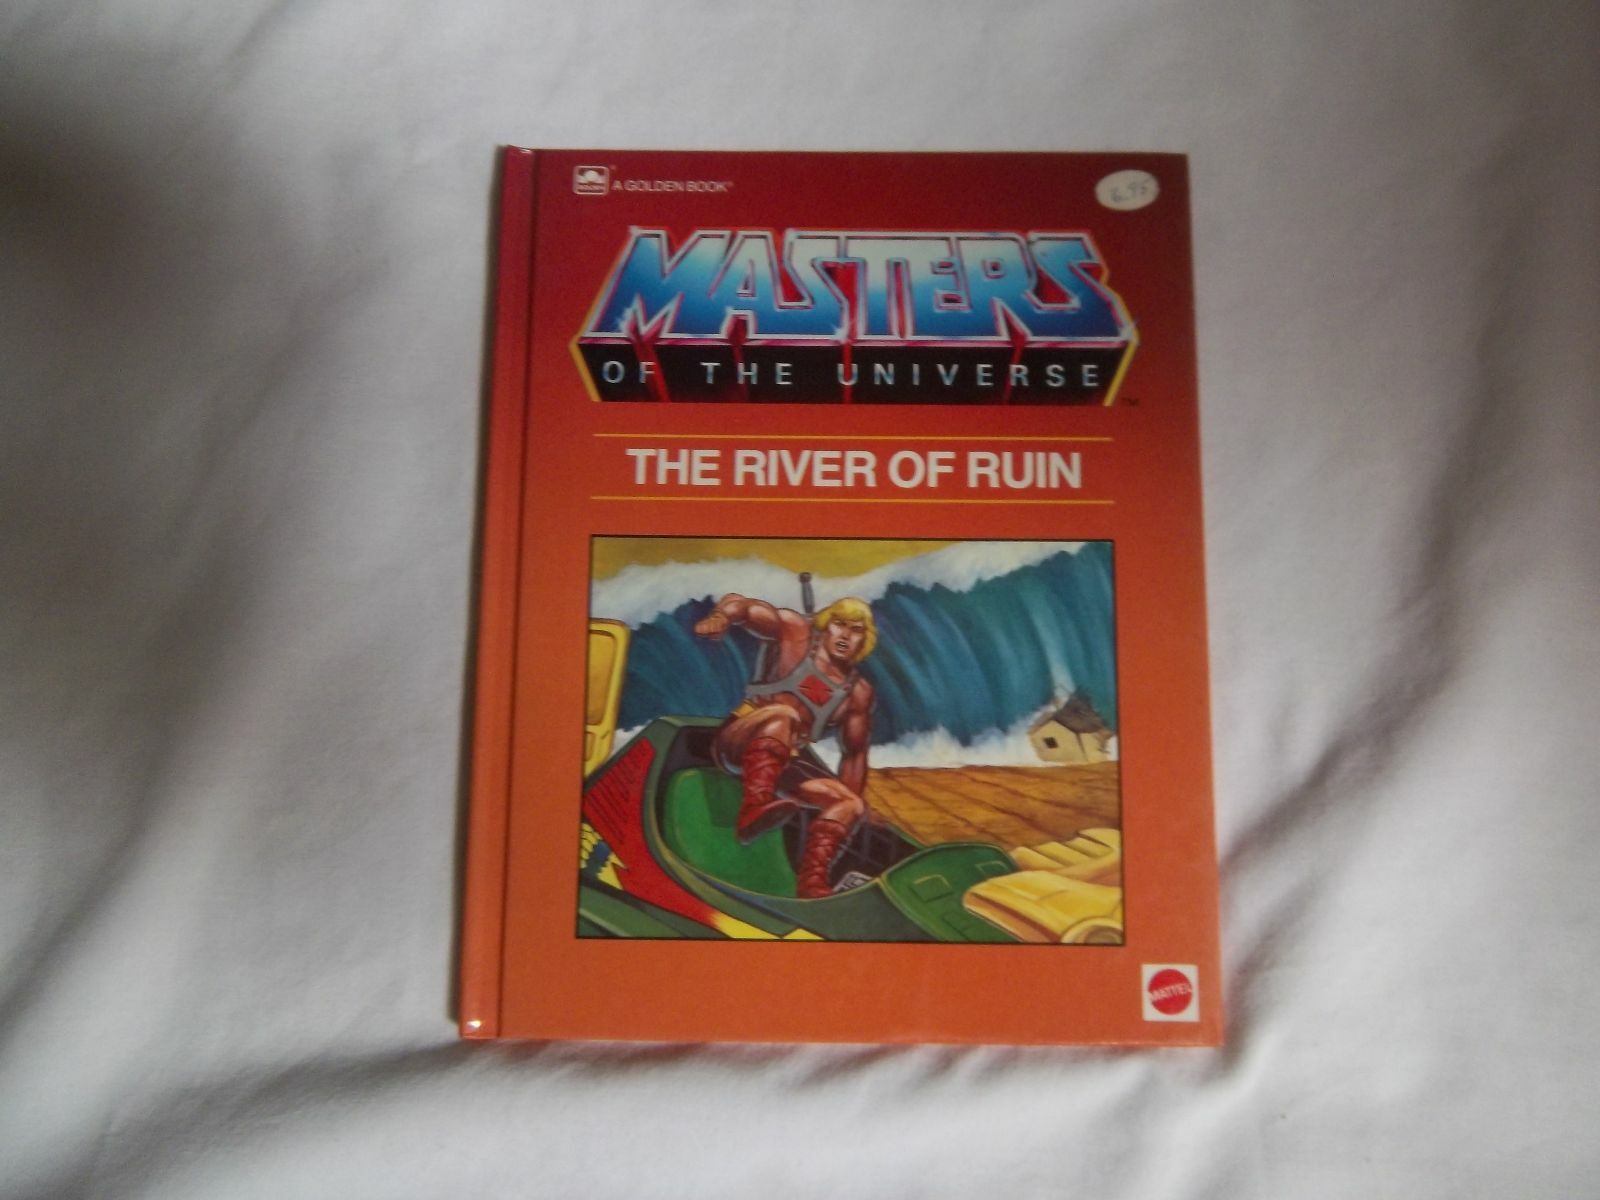 MASTERS OF THE UNIVERSE-RIVER OF RUIN  (HARD BACK)